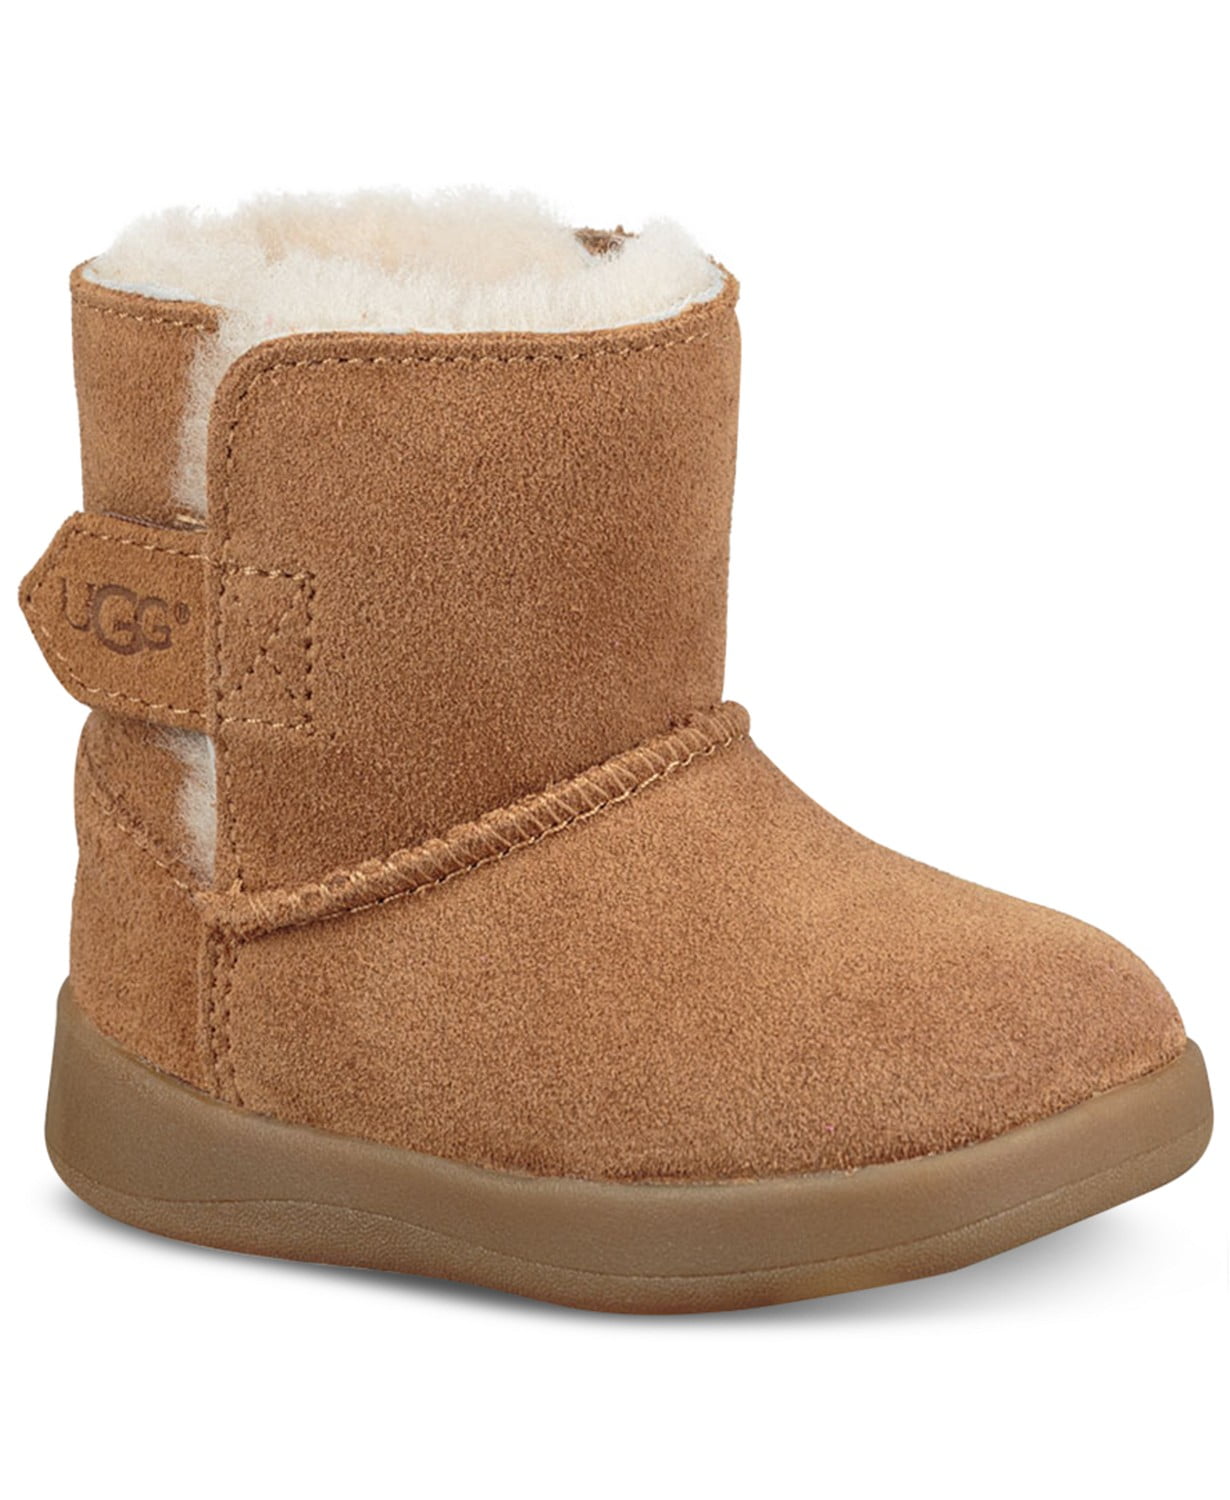 www.couturepoint.com-ugg-baby-unisex-brown-suede-keelan-booties